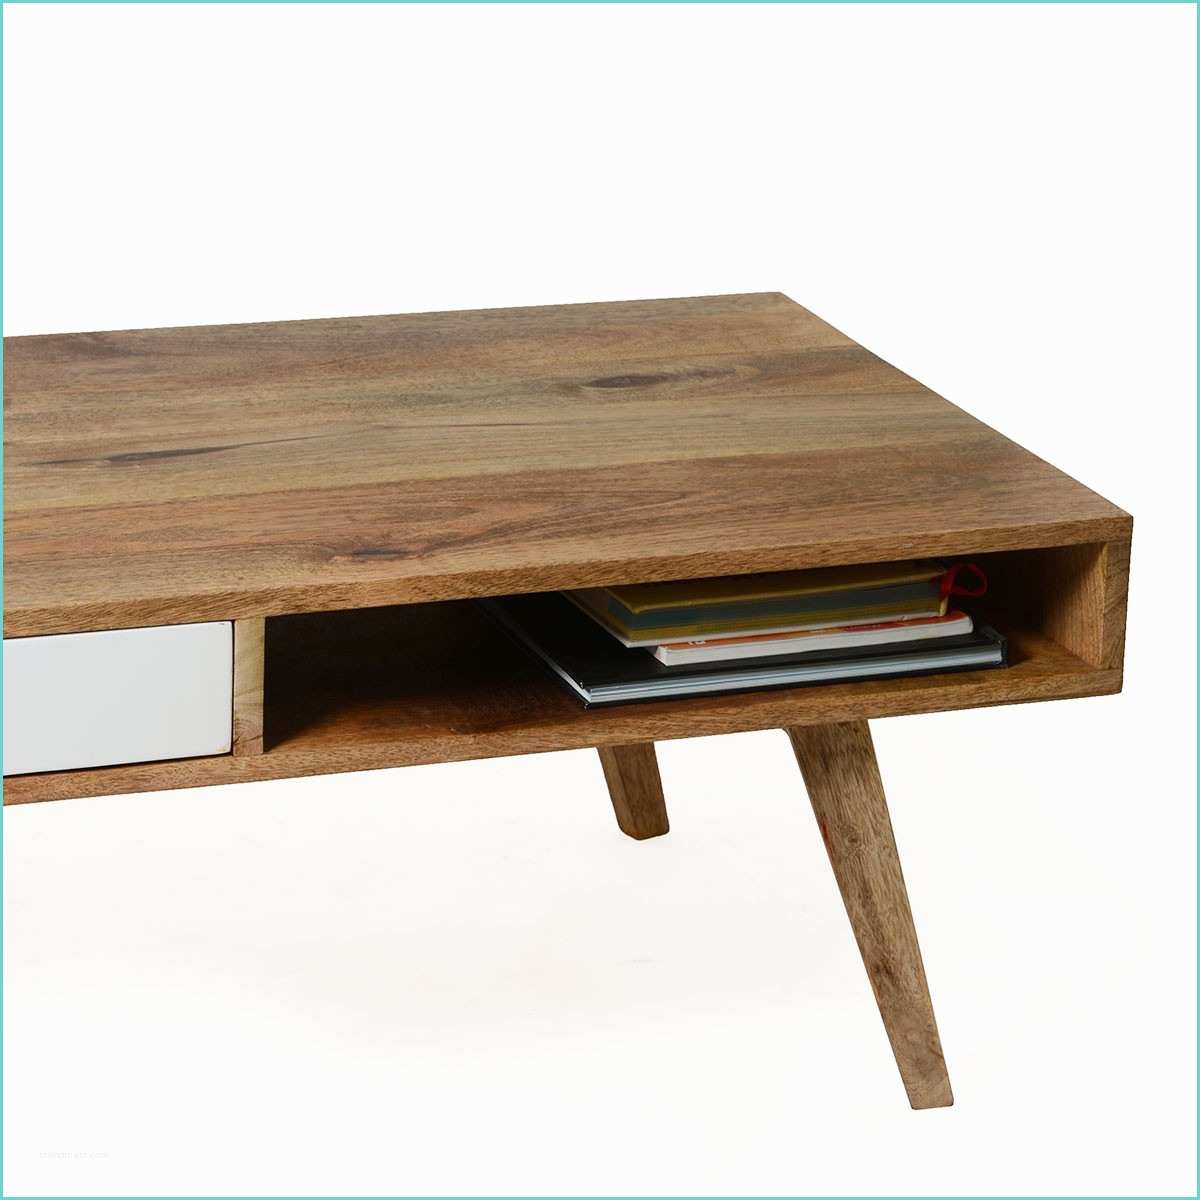 Table Basse Bois Table Basse Bois Massif Scandinave Made In Meubles